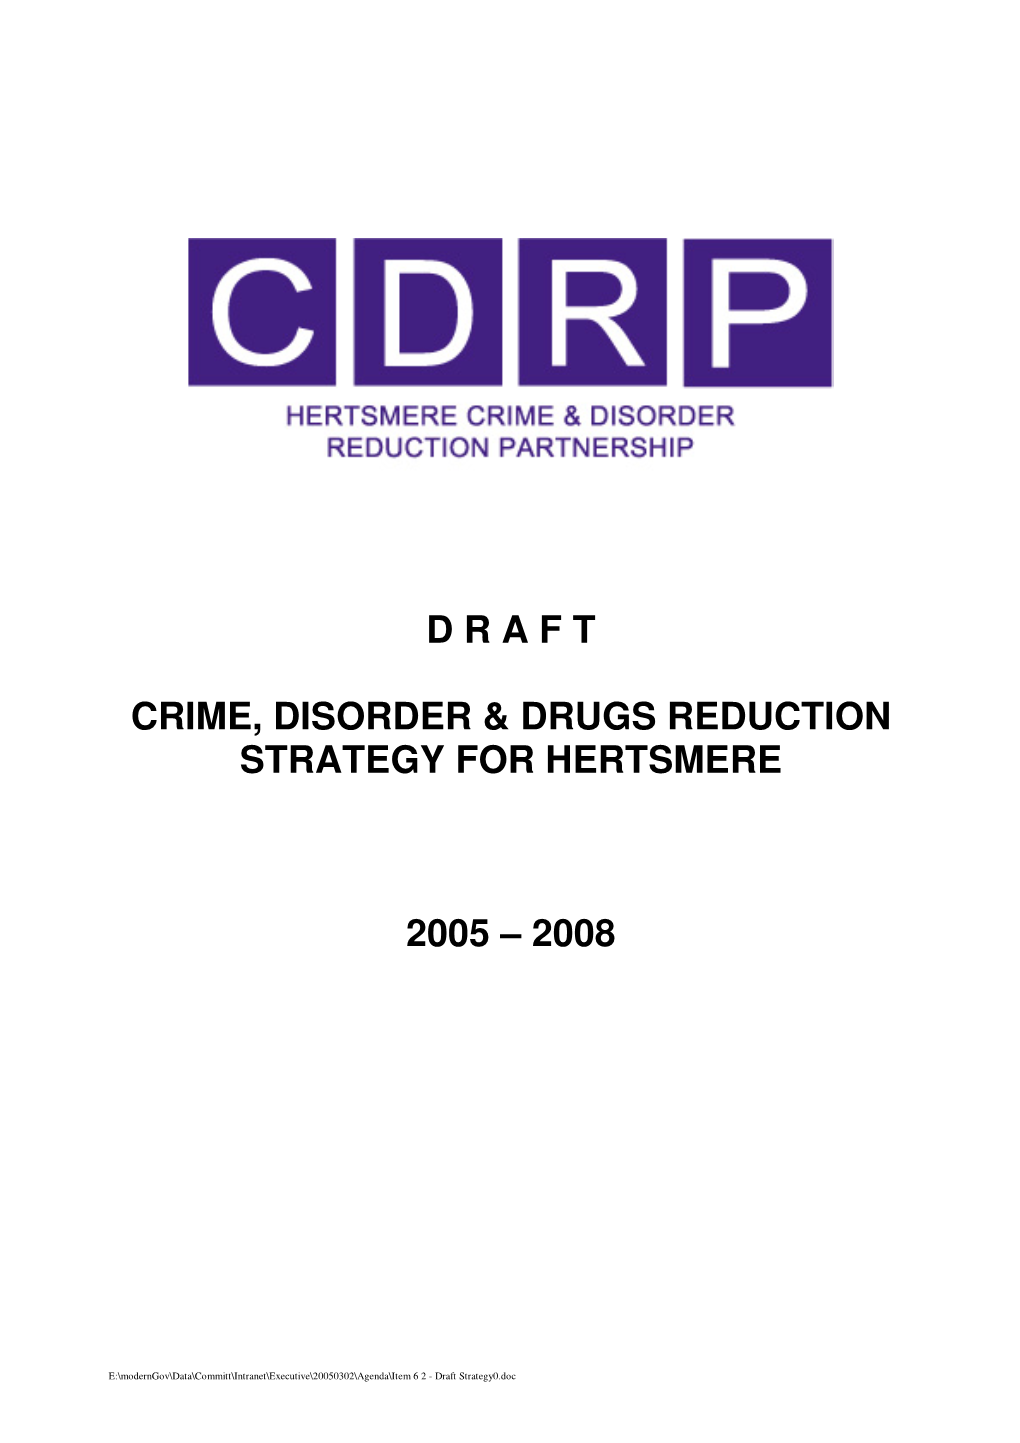 D R a F T Crime, Disorder & Drugs Reduction Strategy